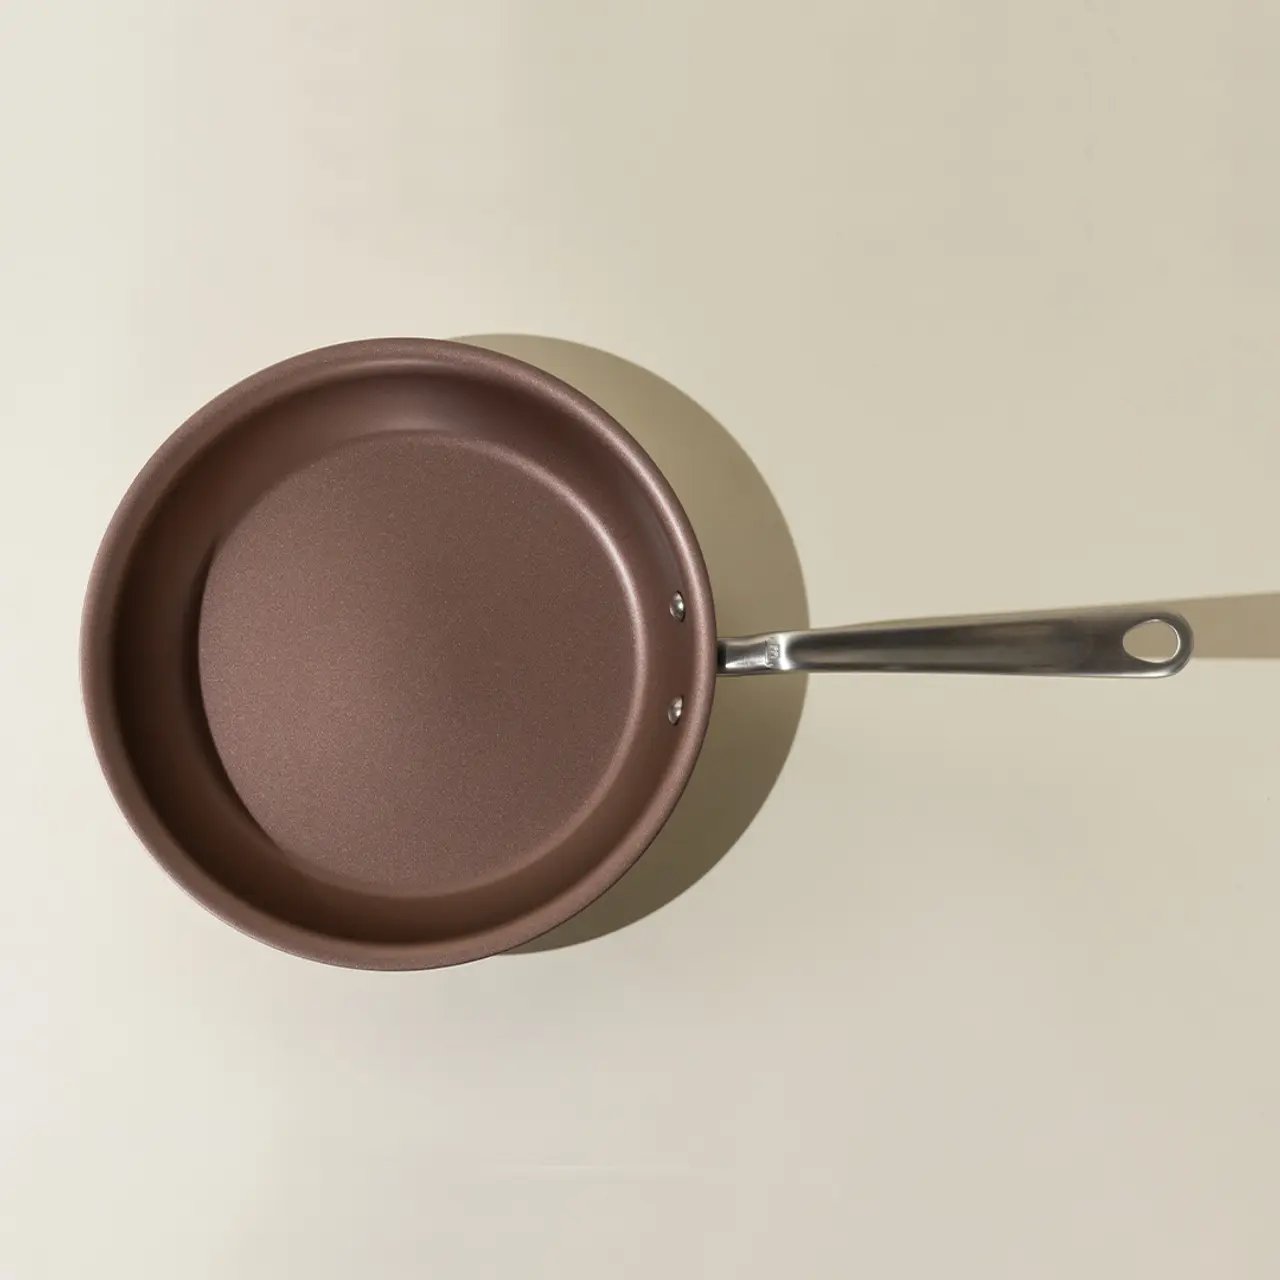 A top-down view of a brown pan with a long silver handle resting on a light surface.